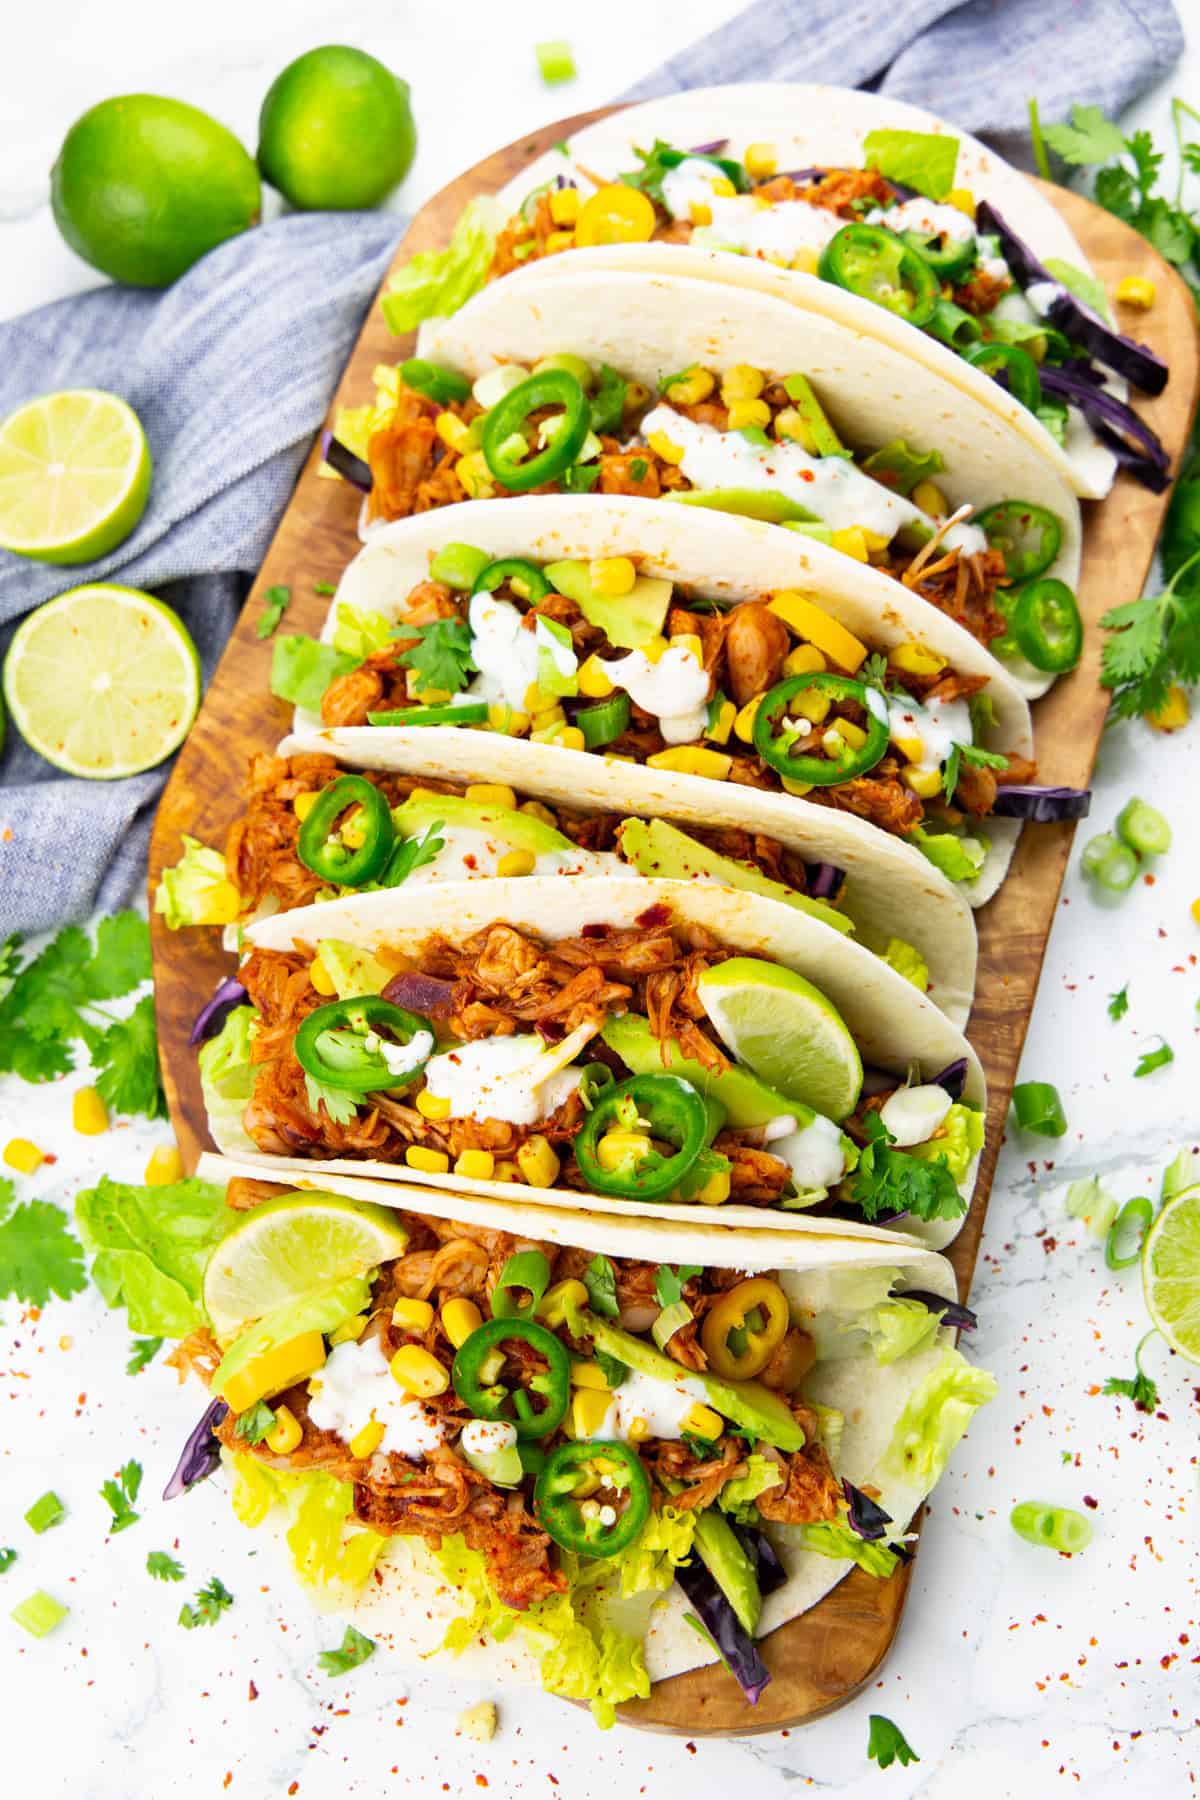 five tacos filled with jackfruit on a wooden board with limes on the side 